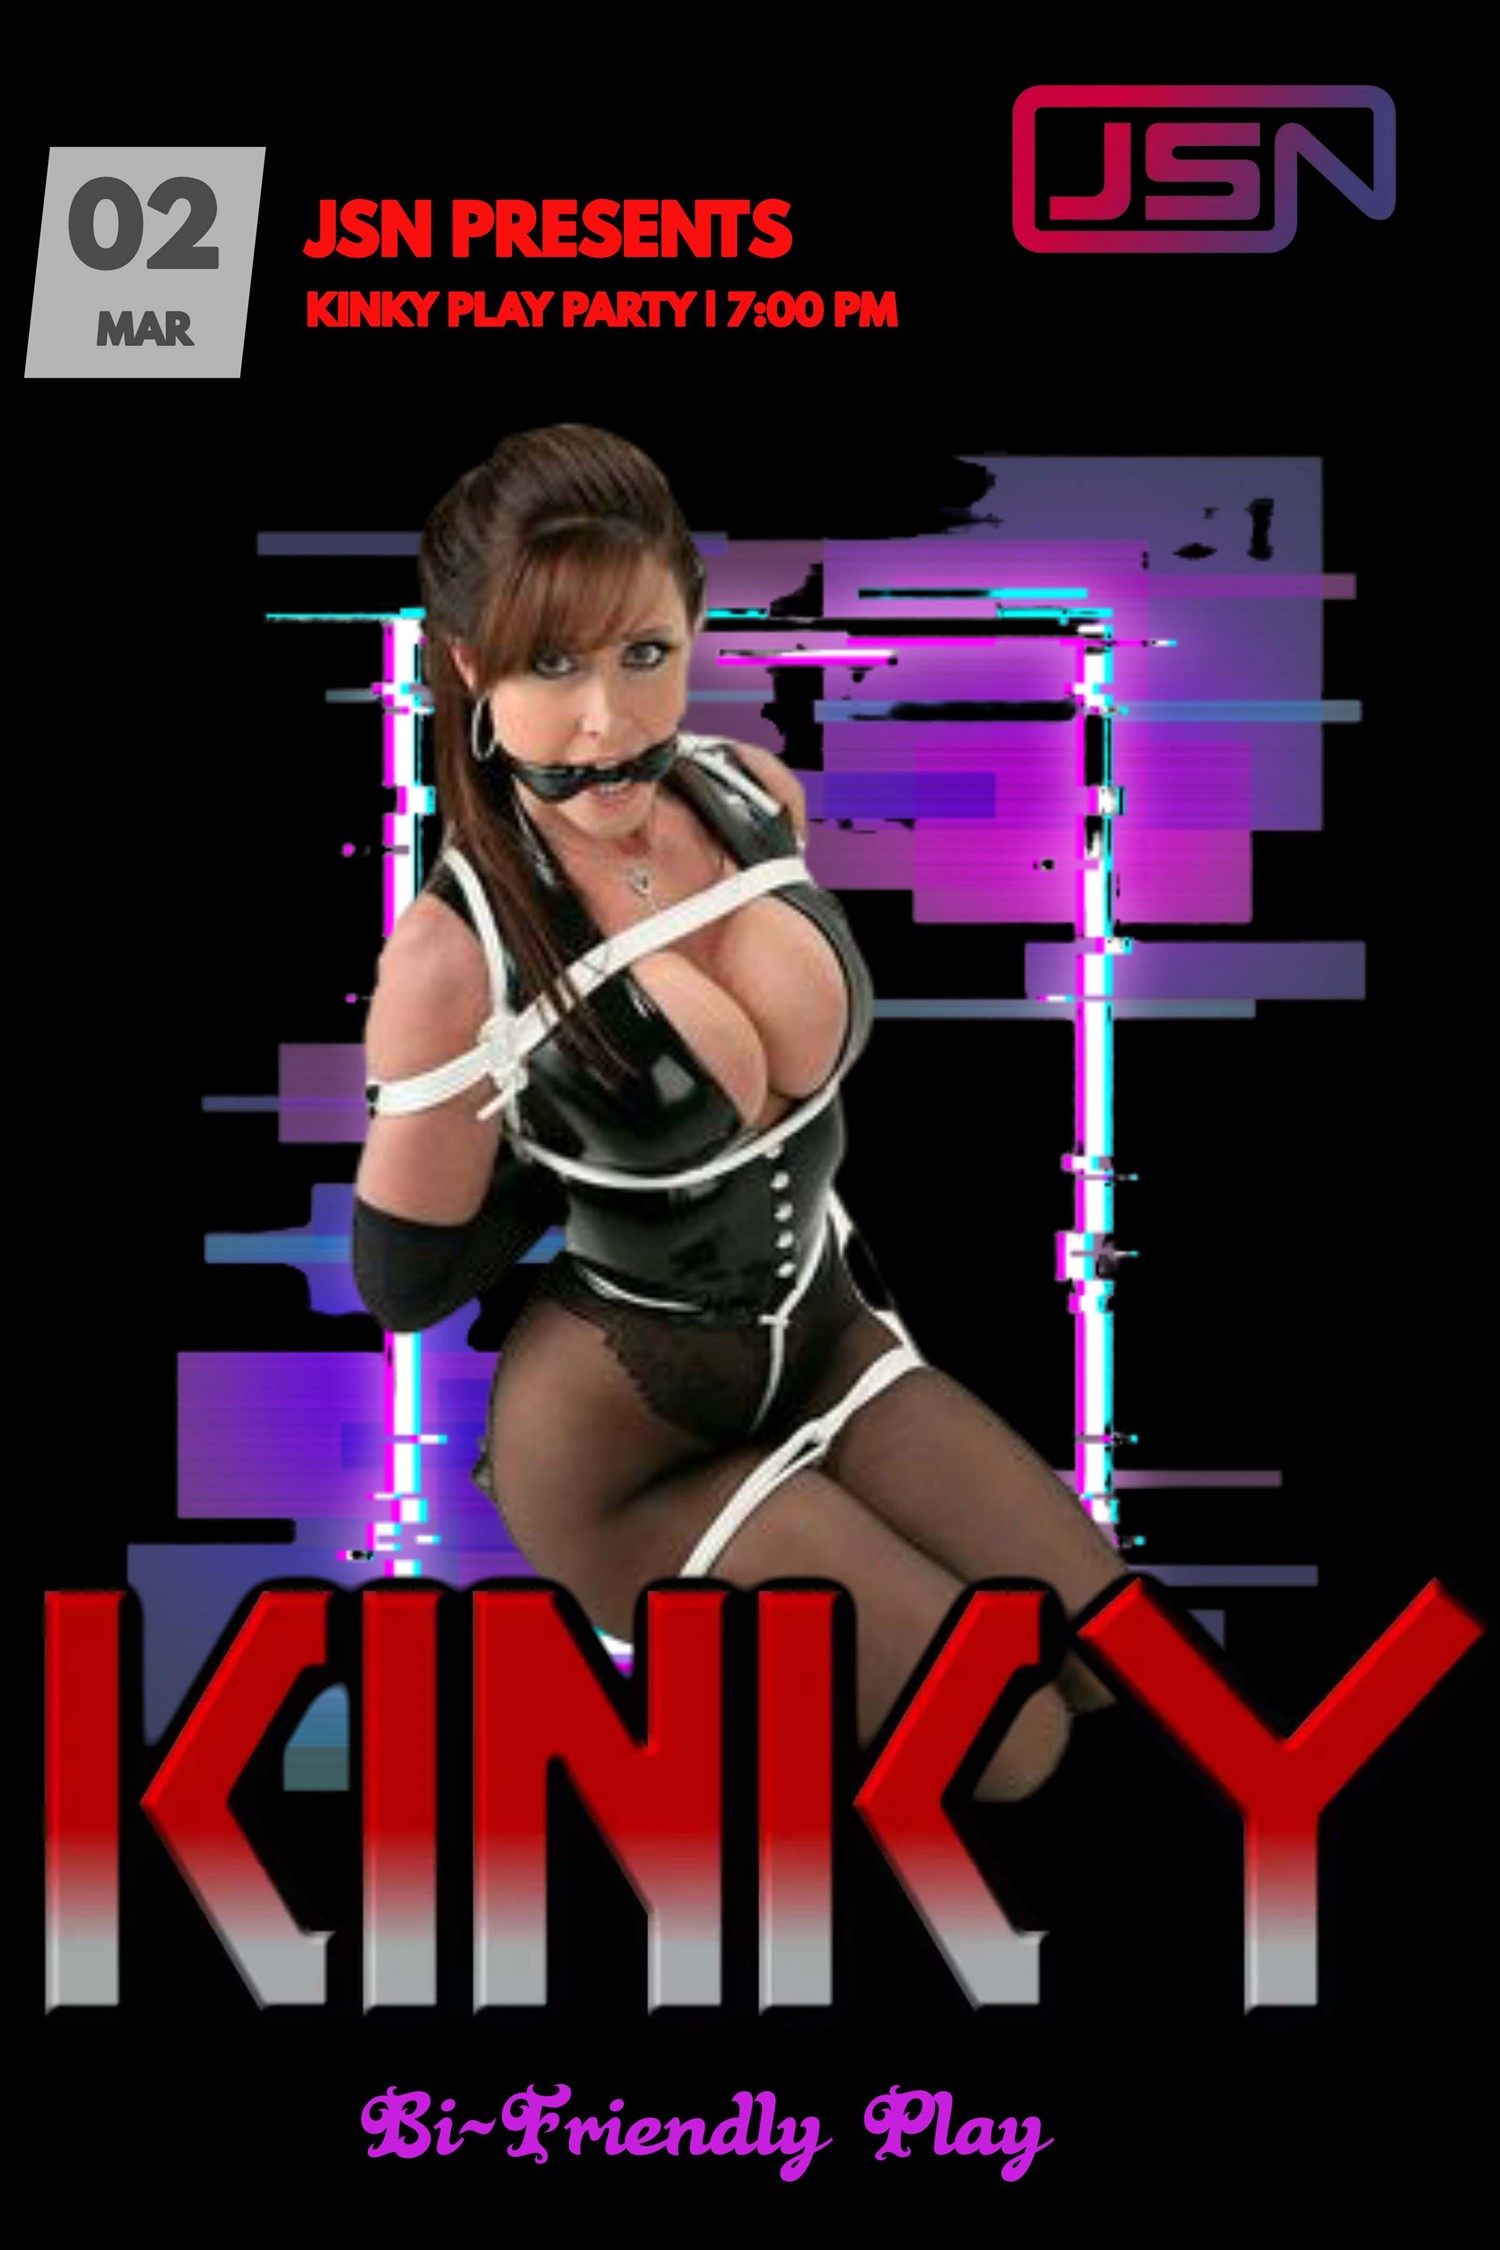 Kinky Play Party Full Swap Play Event on Mar 02, 19:00@Embassy Suites by Hilton - Buy tickets and Get information on Jen's Social Networking 